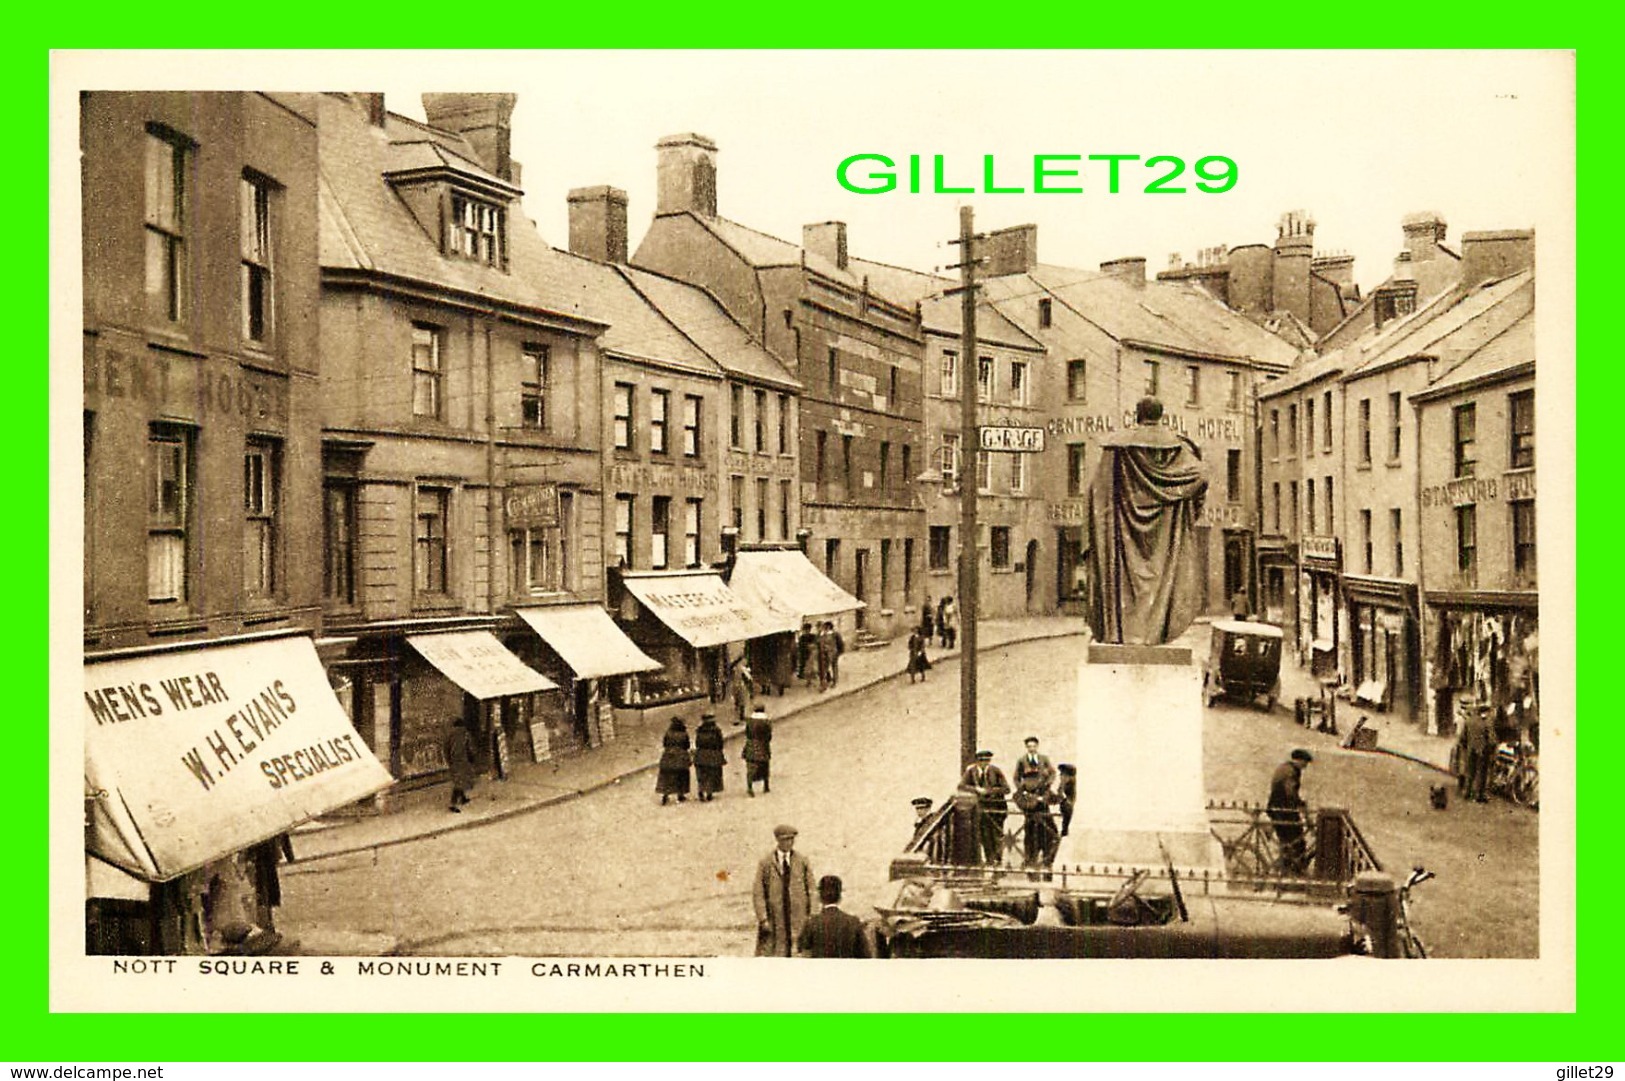 CARMARTHEN, PAYS DE GALLES - NOTT SQUARE & MONUMENT - WELL ANIMATED - PUB. BY CELTIC PRINTING CO - - Carmarthenshire